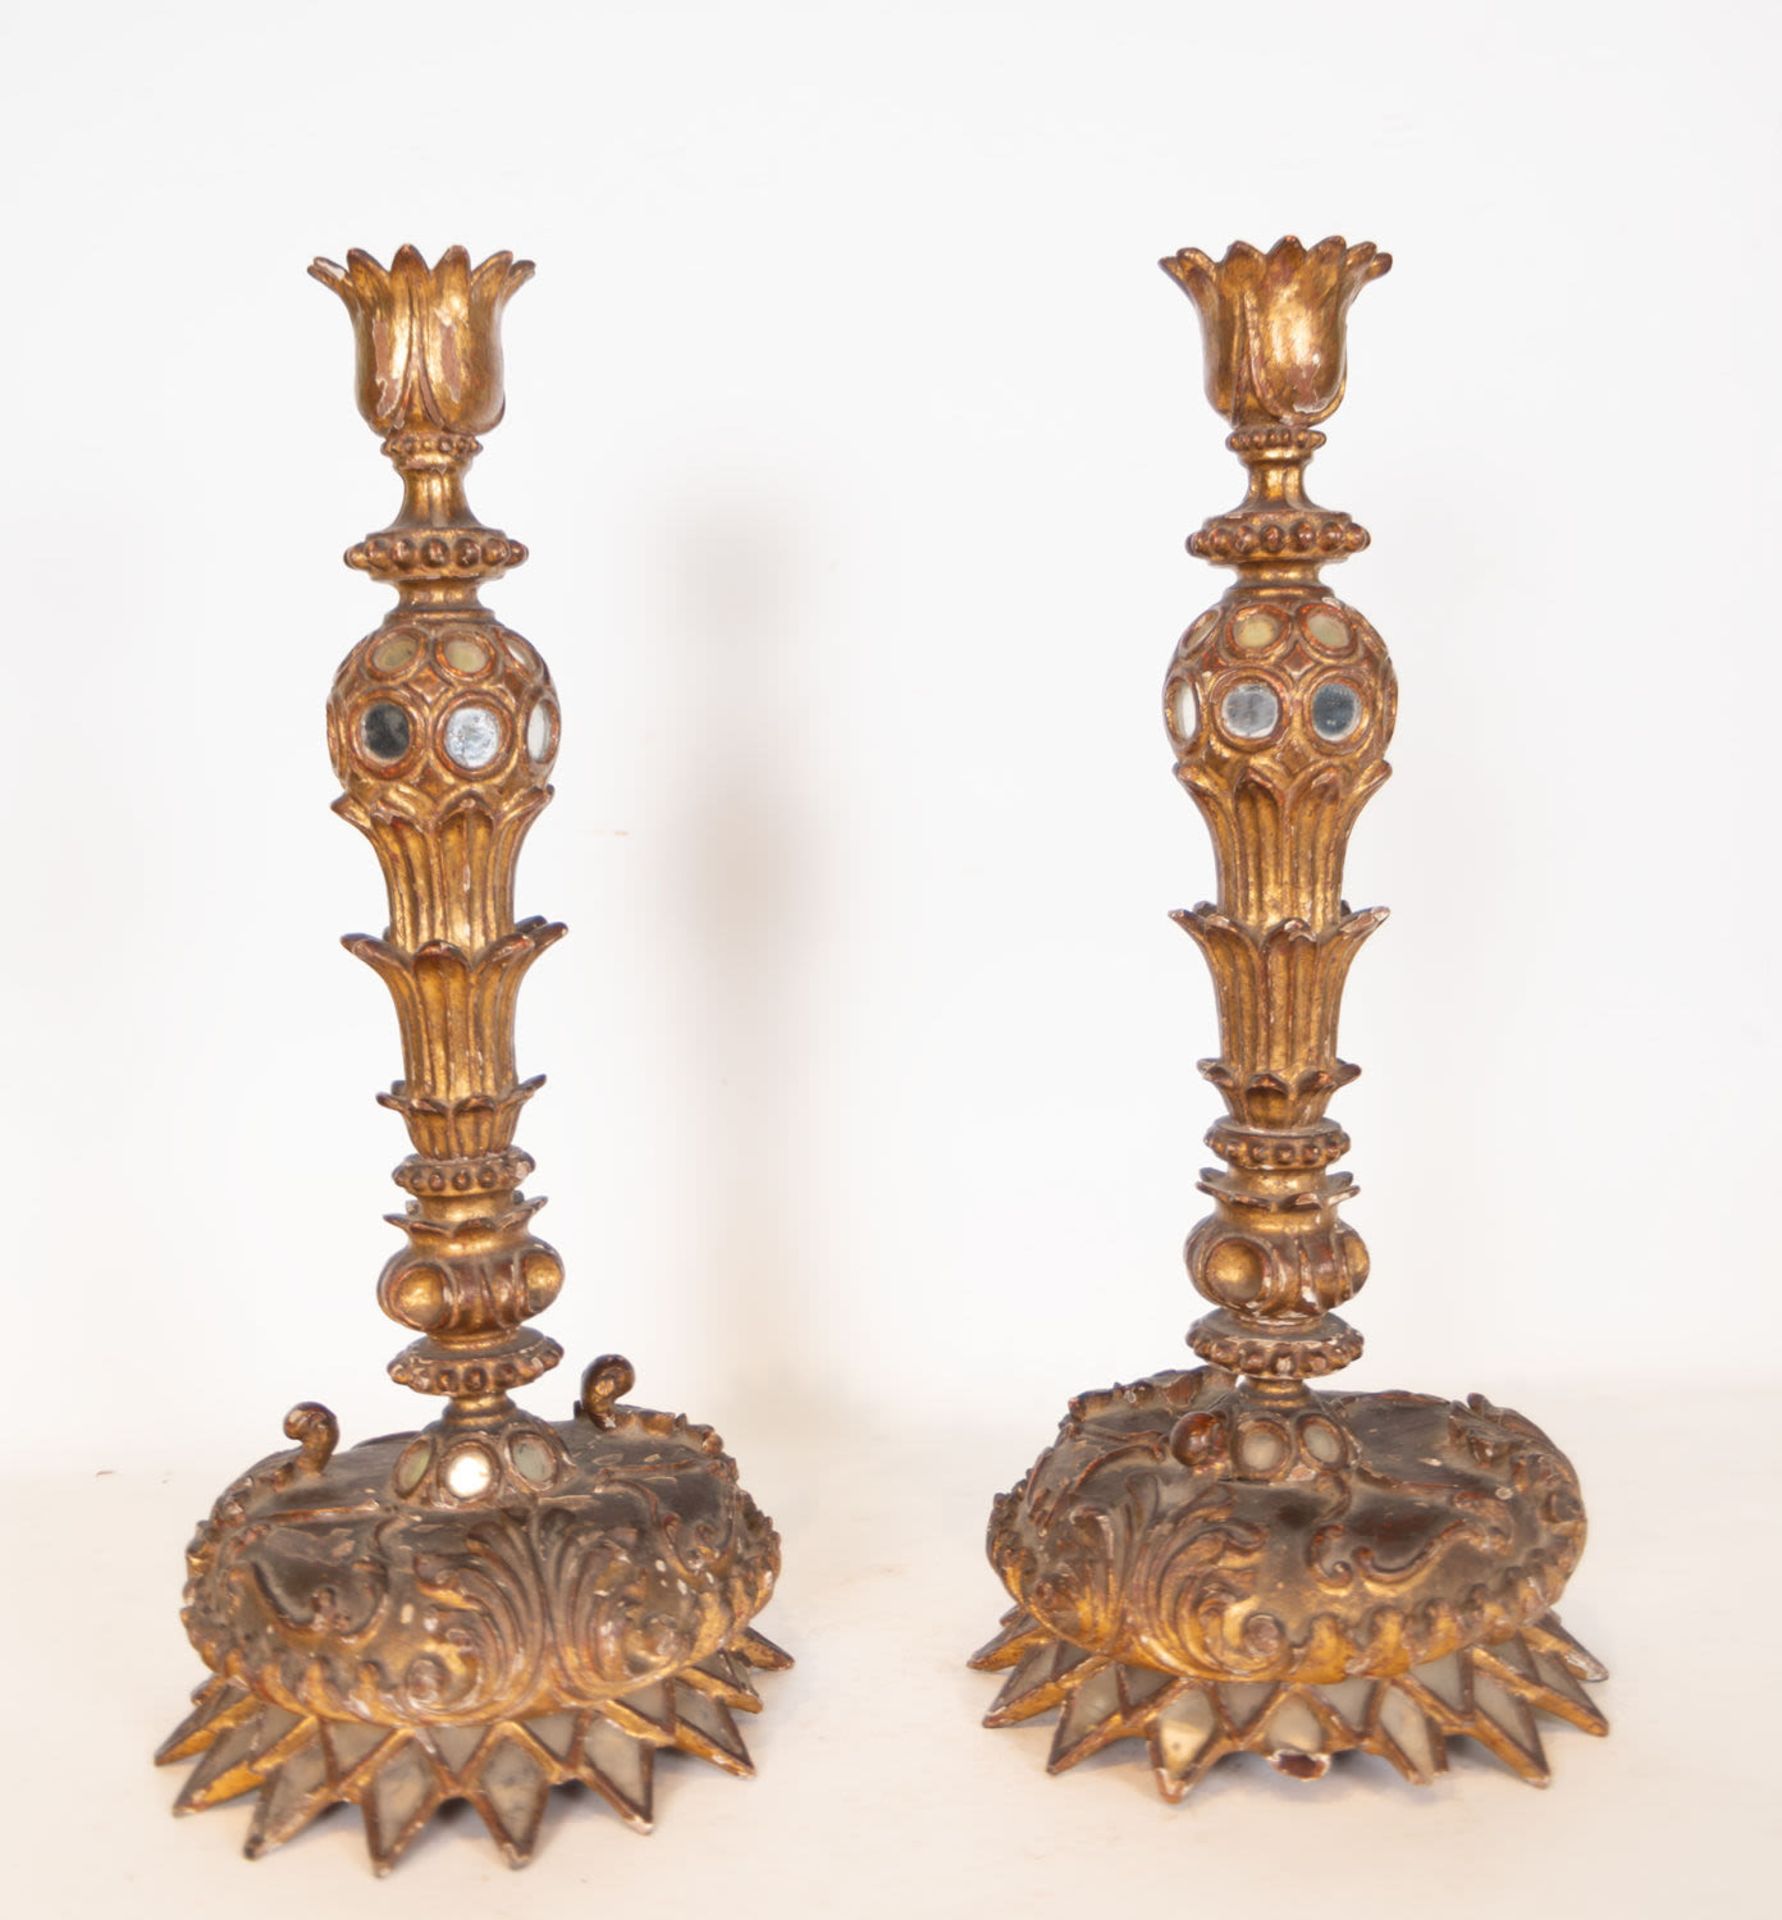 Important pair of candlesticks in gilt wood and quartz and mirror applications, Novohispanic Viceroy